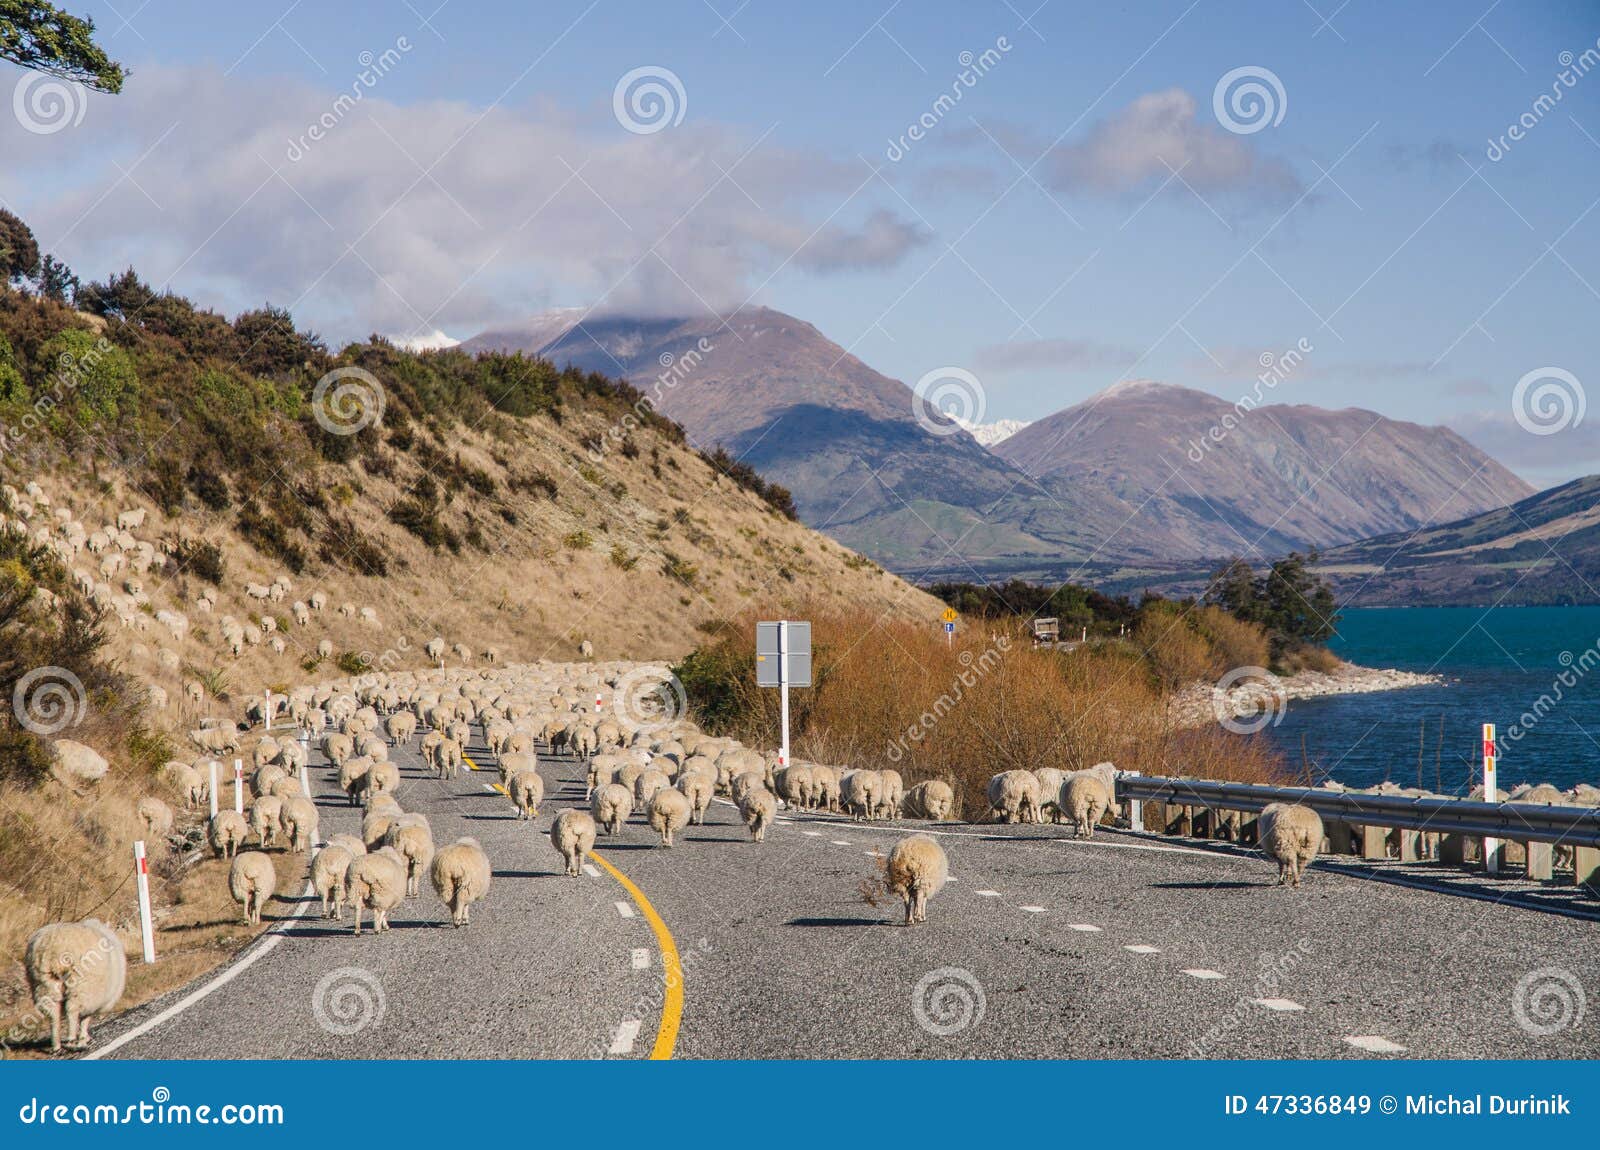 herding sheep on the road